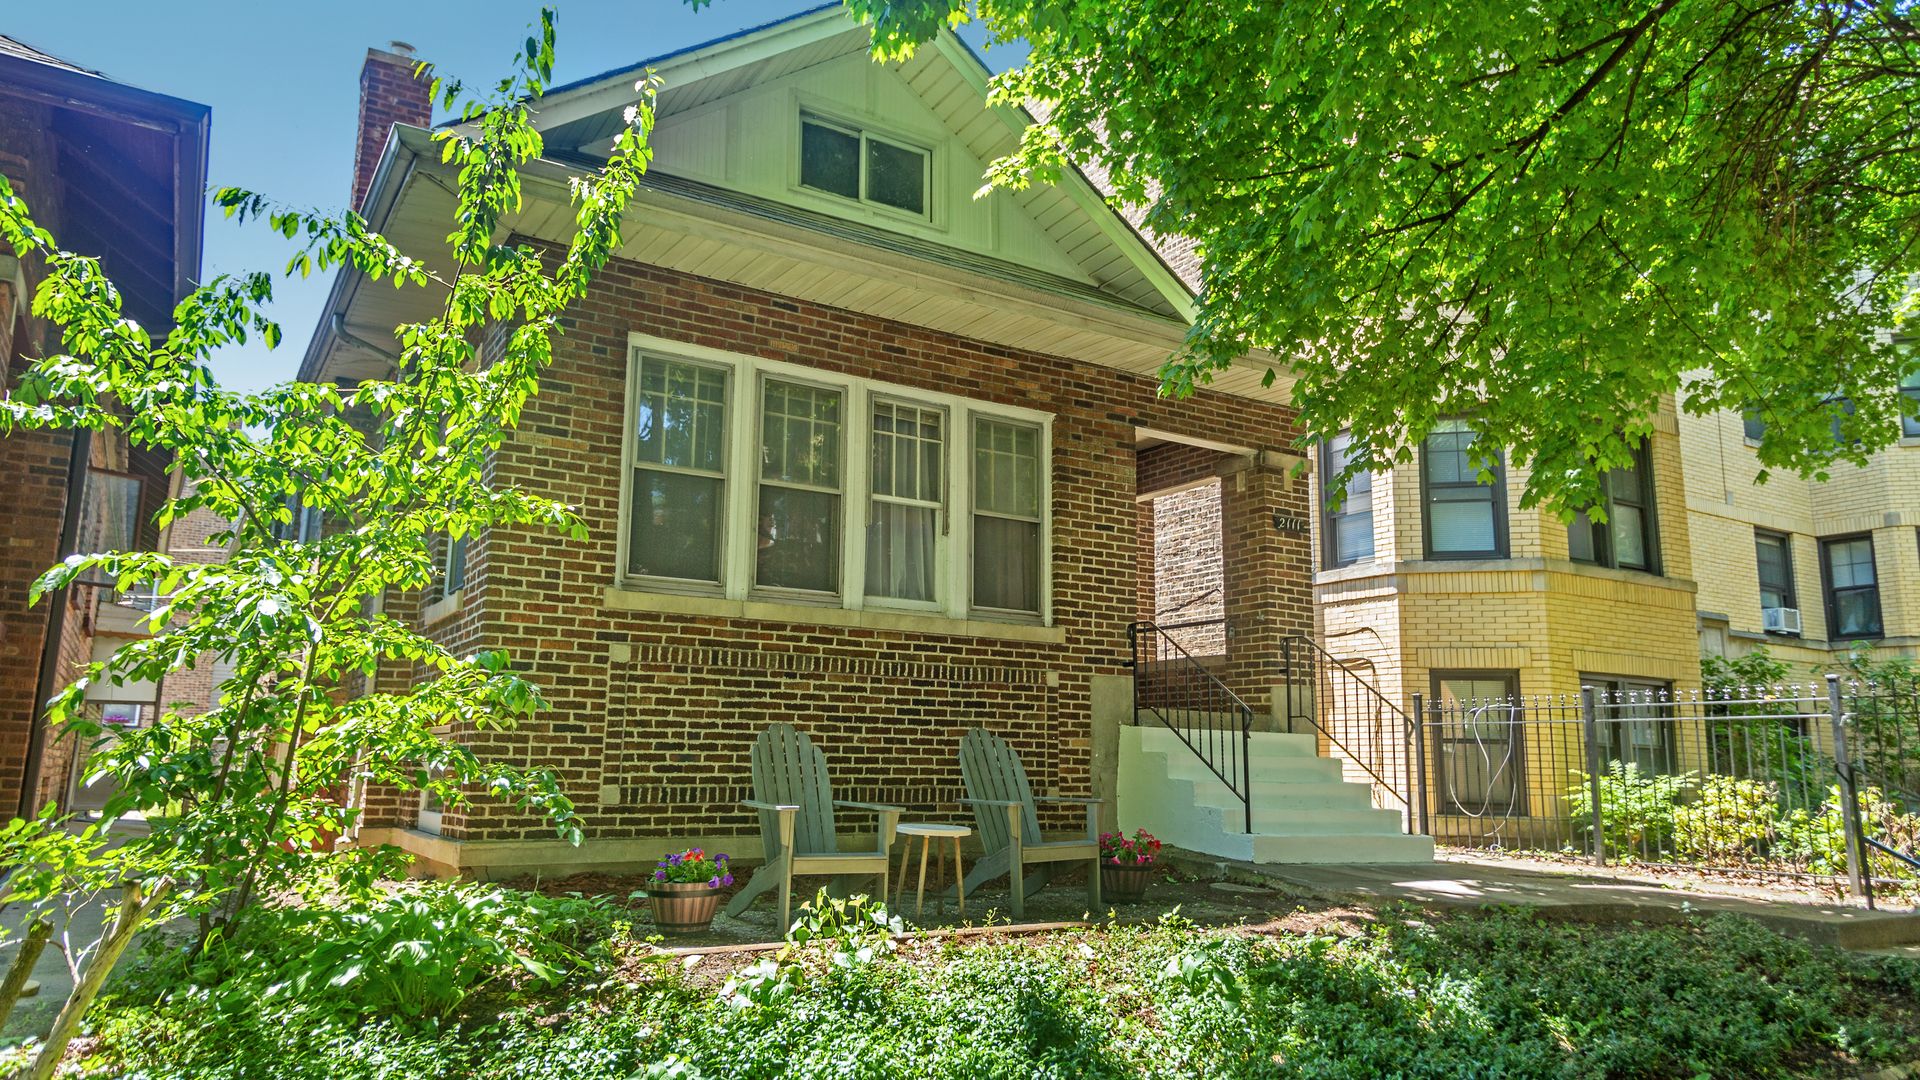 Main Photo: 2111 W Birchwood Avenue in Chicago: CHI - Rogers Park Residential for sale ()  : MLS®# 10751837